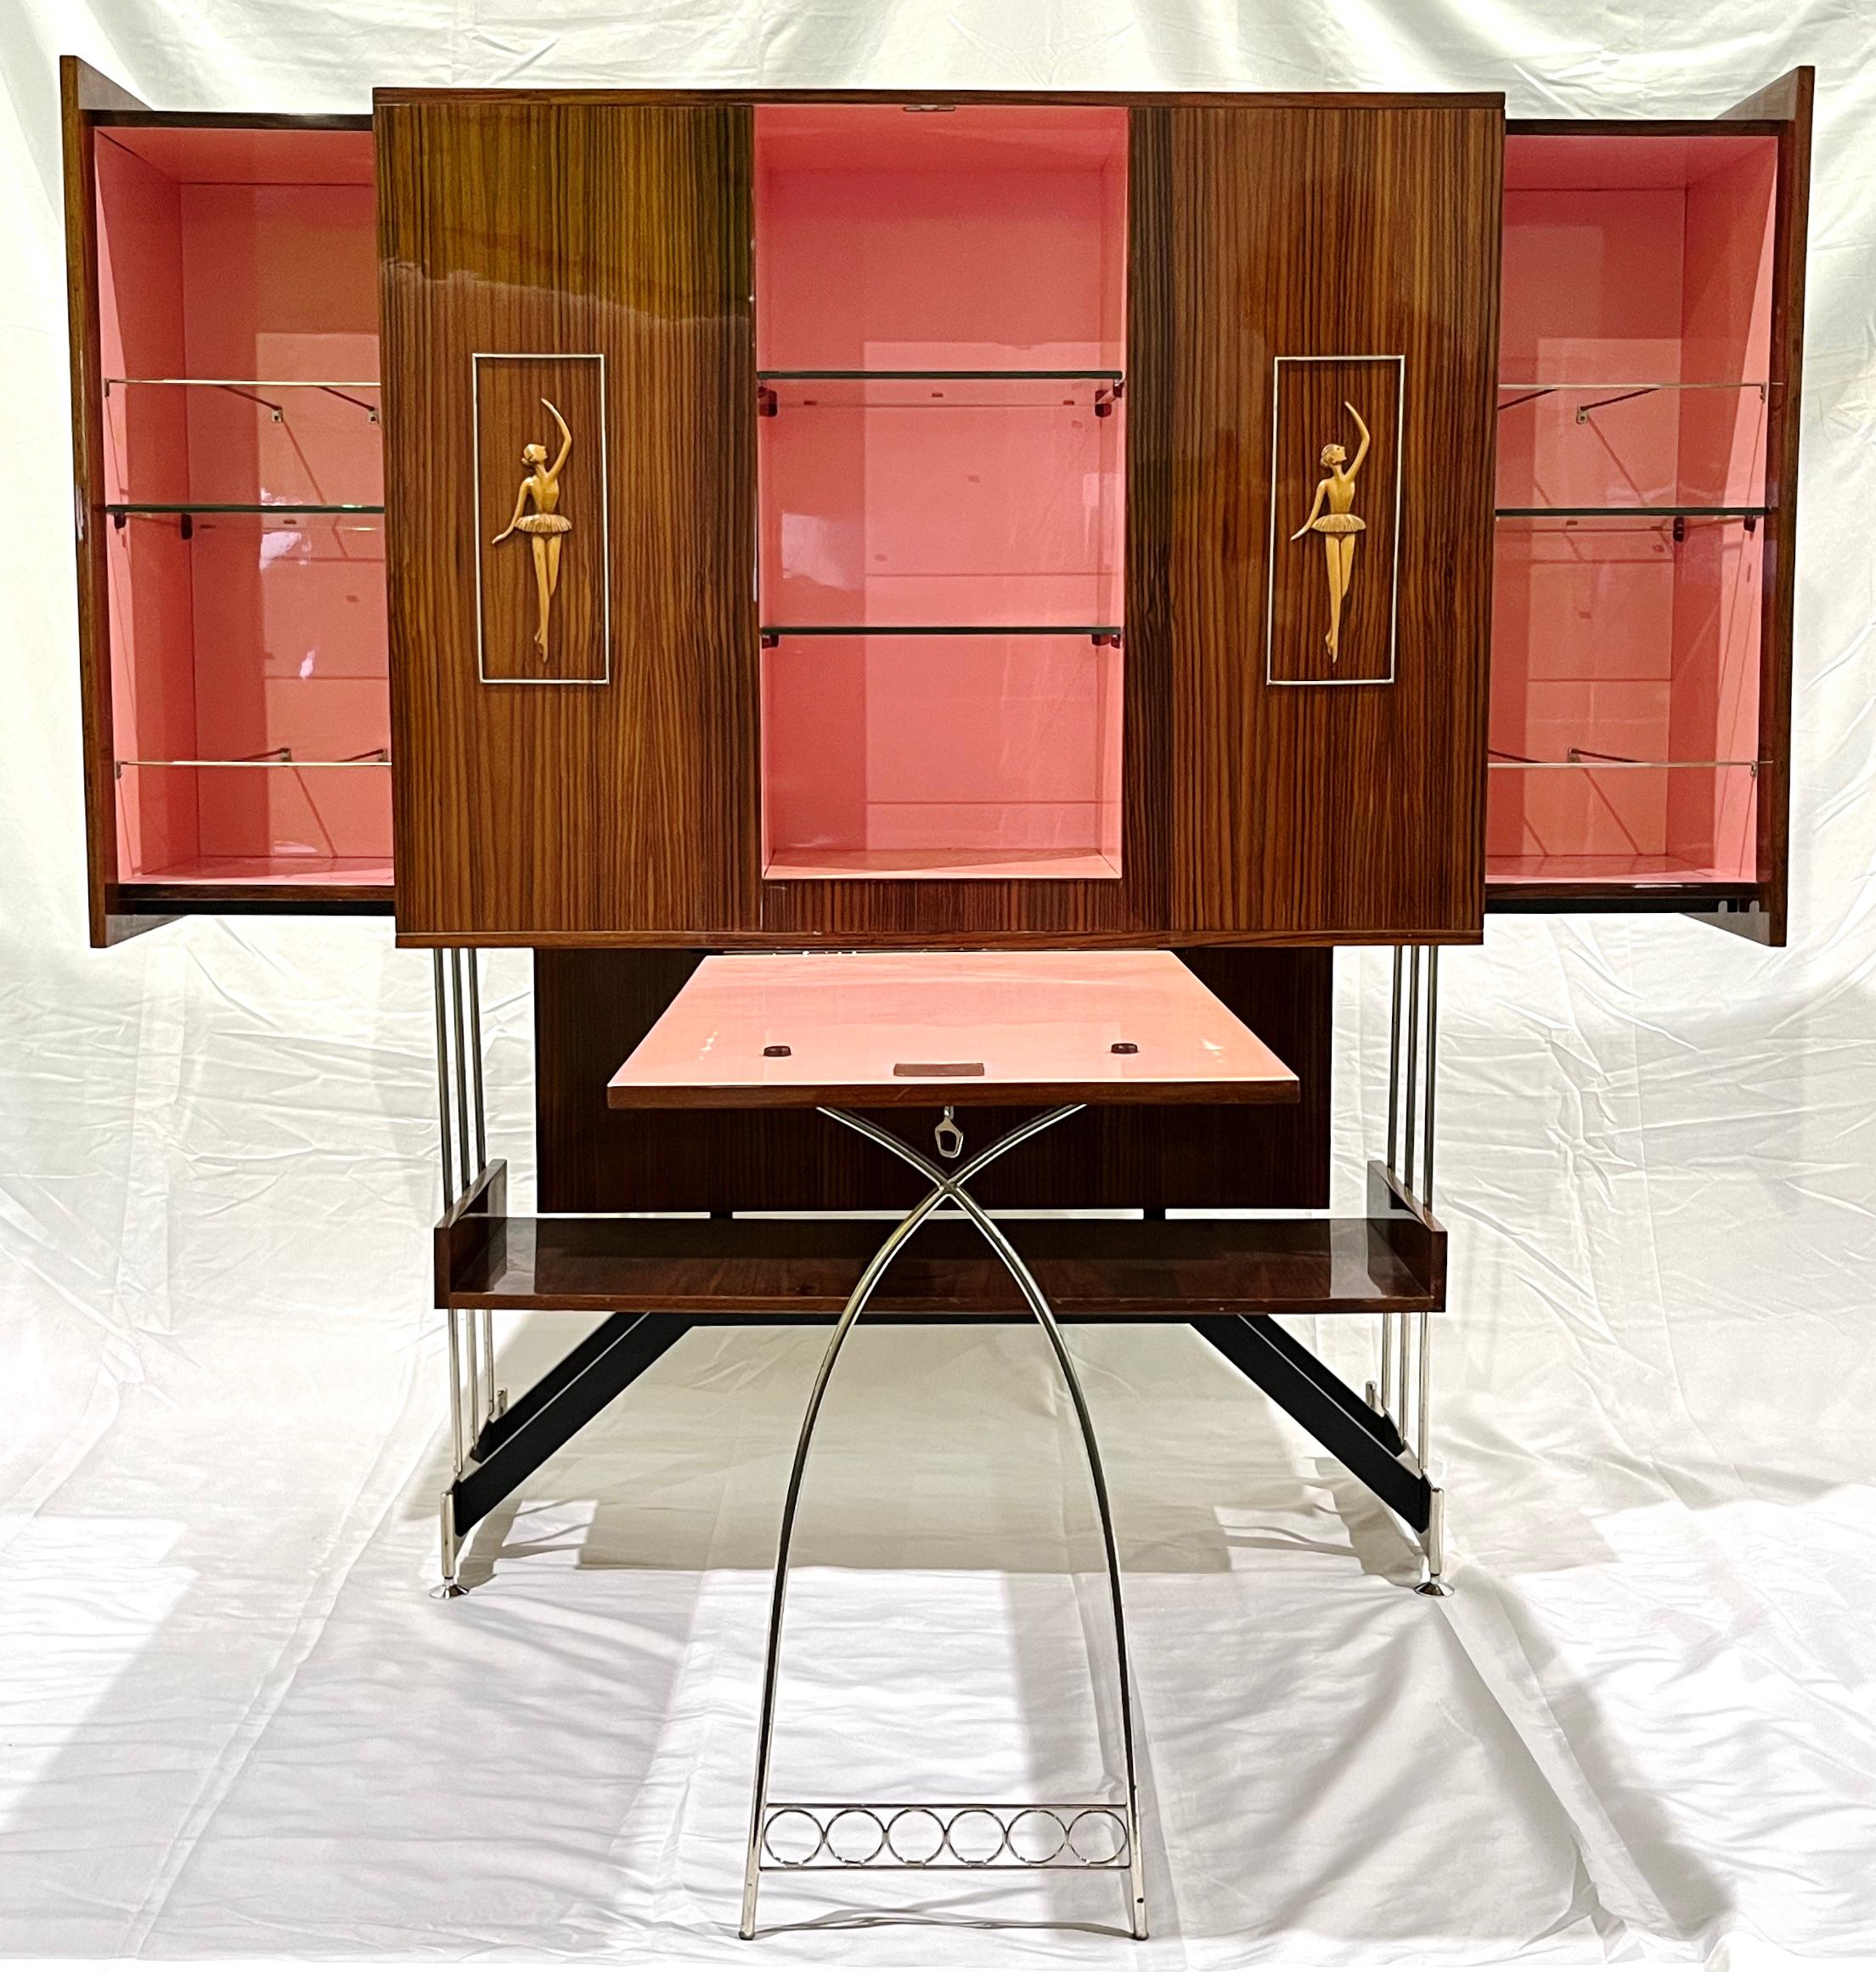 Mid-20th century rare vintage find attributed to Vittorio Dassi: Italian Rosewood Dry Bar / Buffet Cabinet with drop-down table and pull-out sides to reveal inner shelving with bottle and glasses racks, entirely hand-crafted. This unique Italian